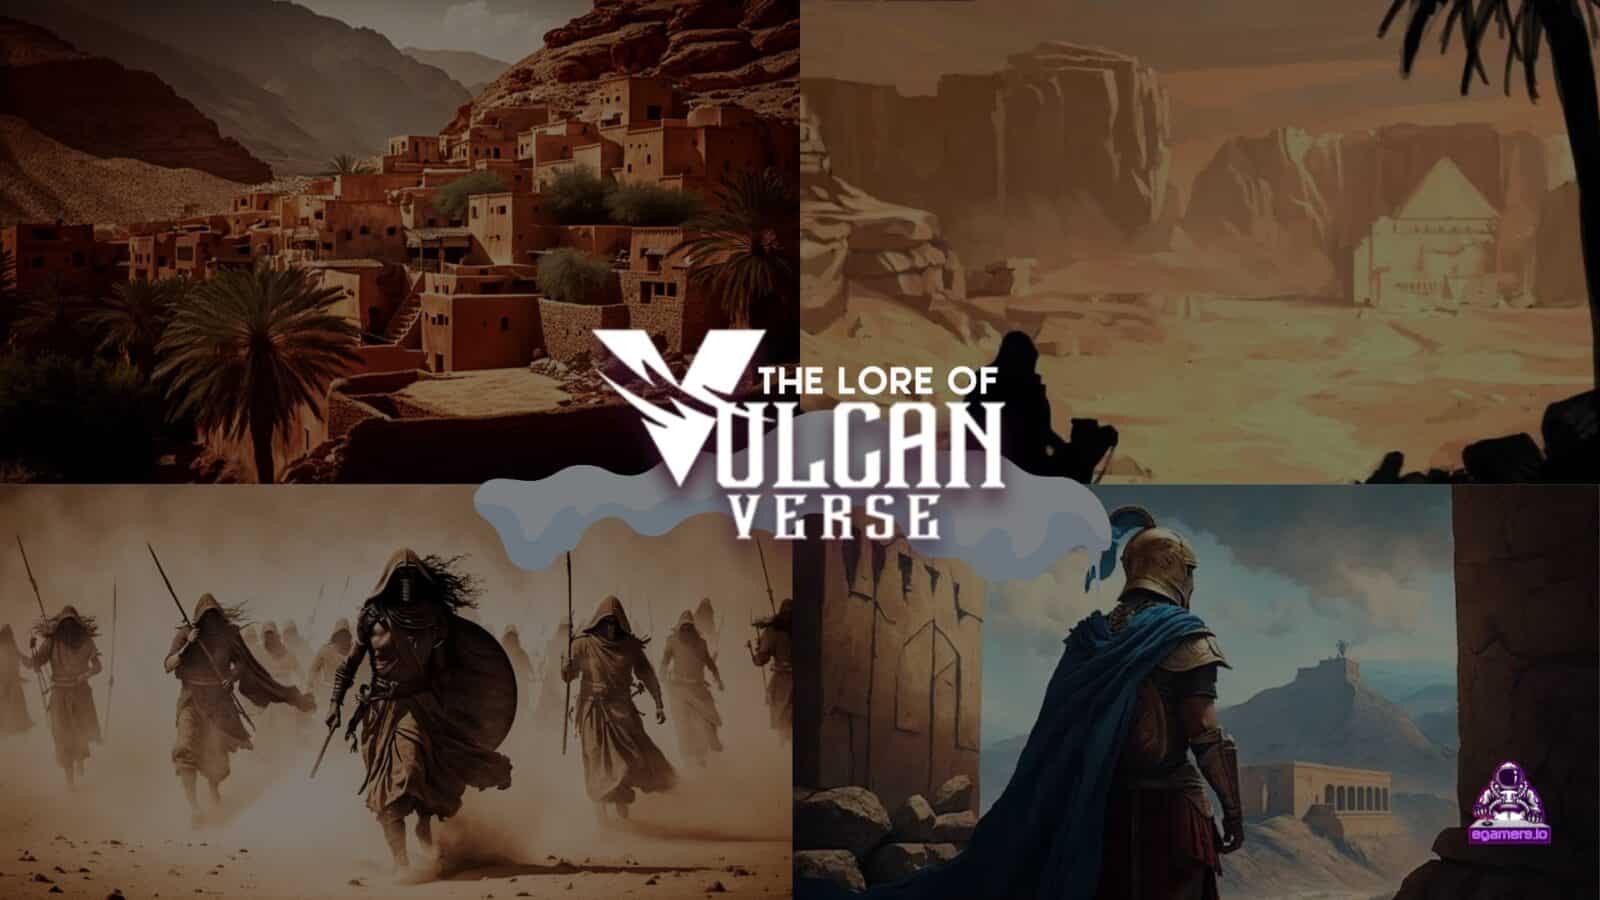 the desert of notus 1 Vulcanverse Lore Leading gaming studio VulcanForged continues the lore of its flagship MMORPG VulcanVerse with The Desert of Notus! Today Mar. 2, Vulcan Forged invites everyone to meet this hot, arid, and deadly land, the Desert of Notus!